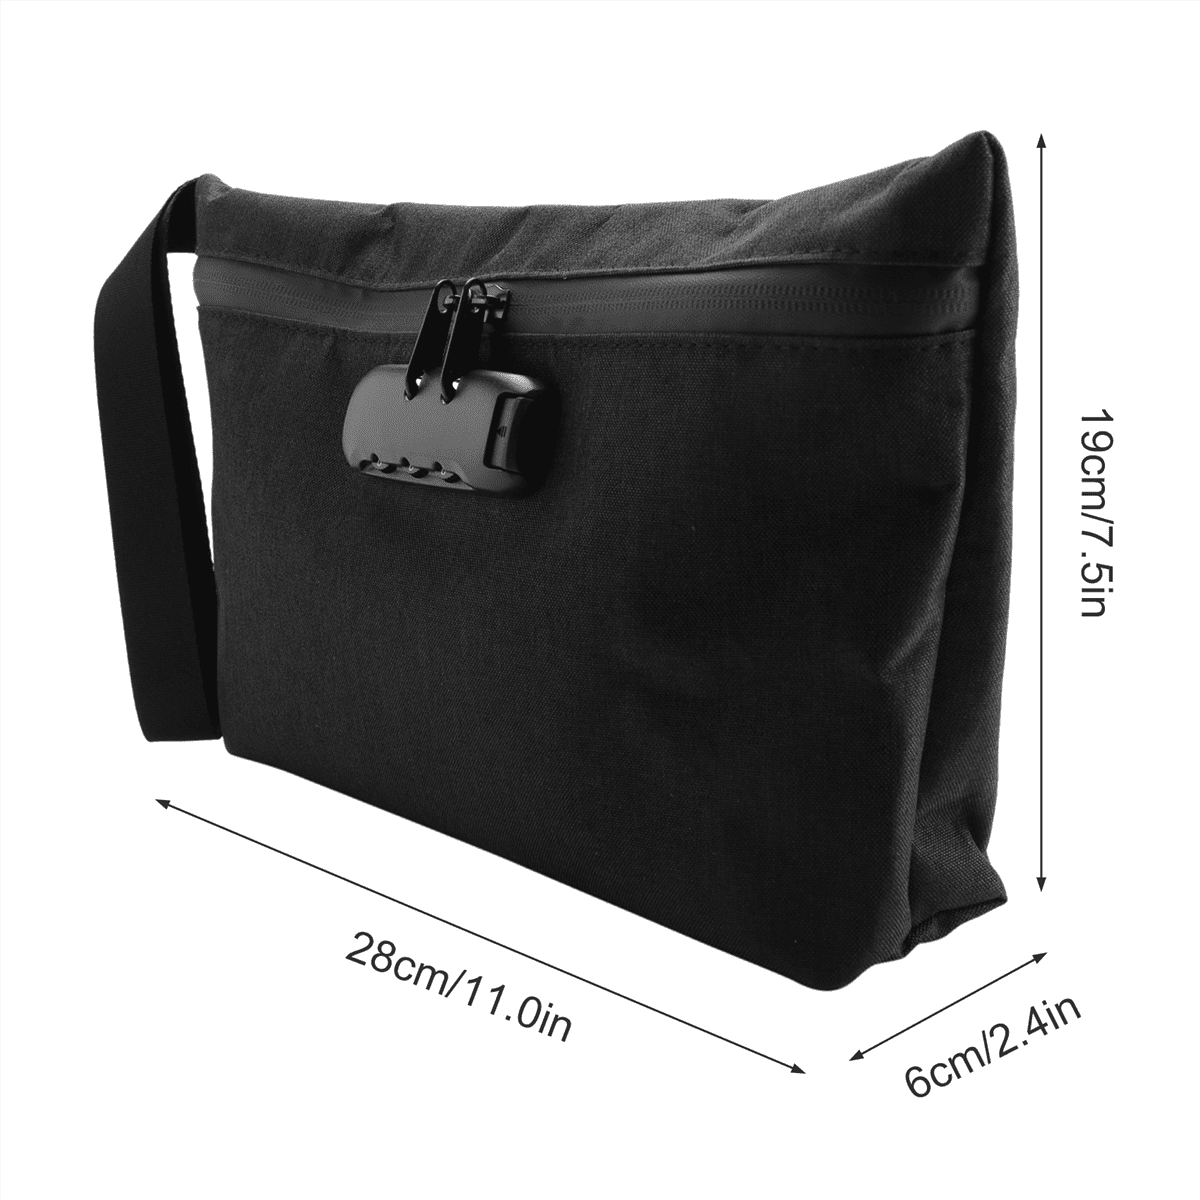 11 X 7.5inch Money Bag with Lock, Money Pouch for Travel Storage ...